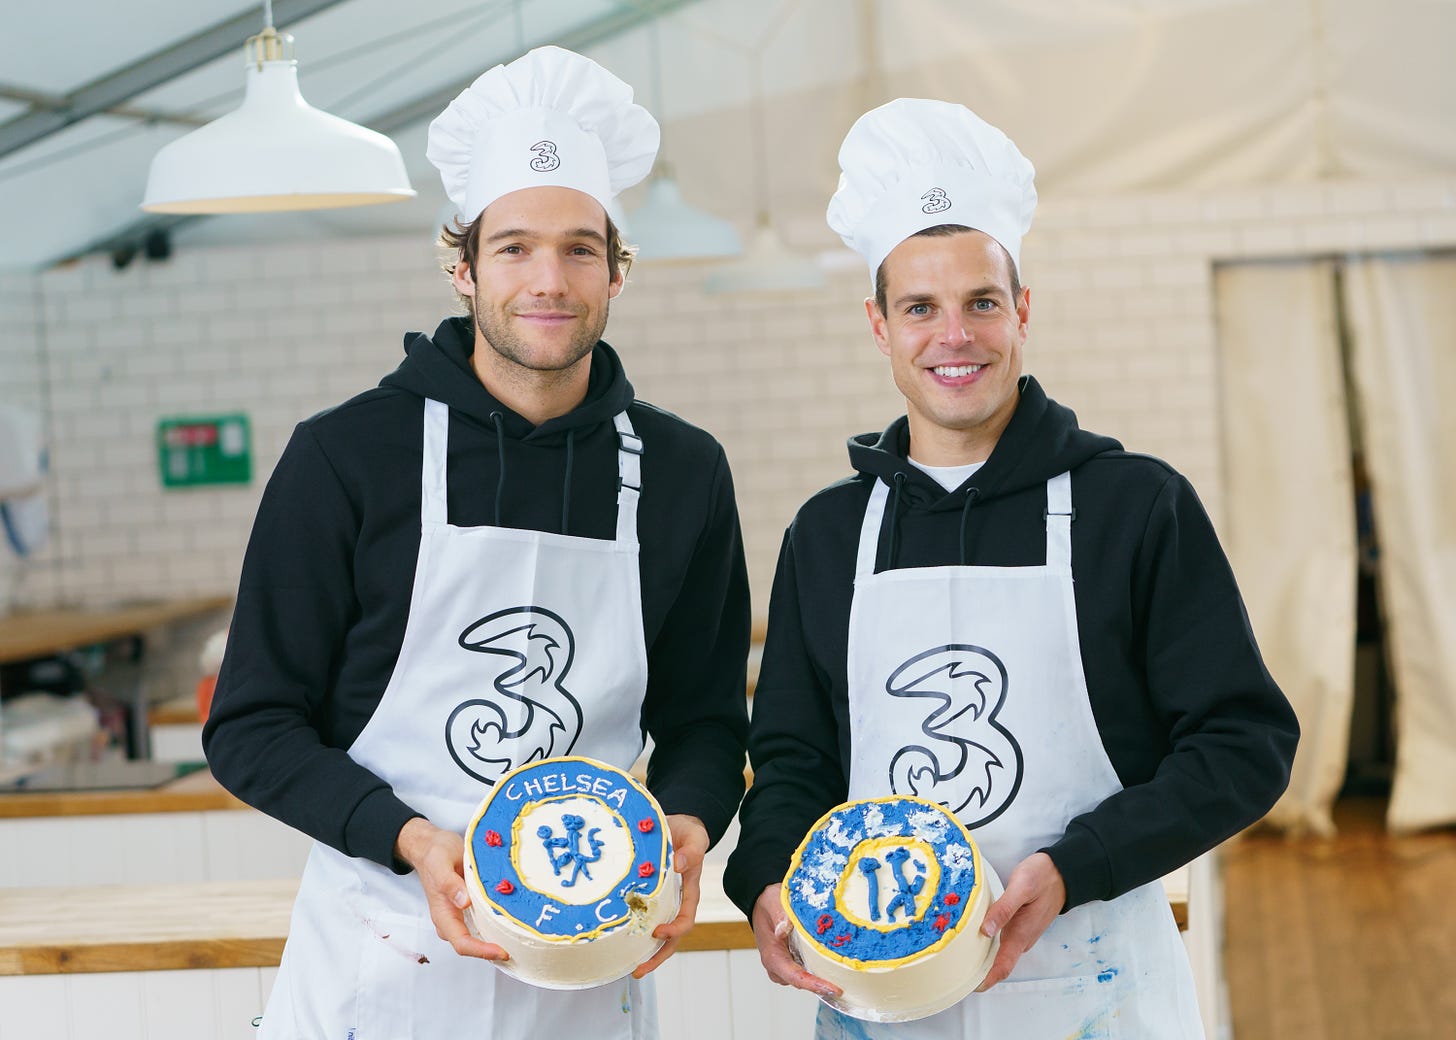 Chelsea stars Cesar Azpilicueta and Marcos Alonso compete in bake off but  Blues skipper cooks up &#39;complete disaster&#39;